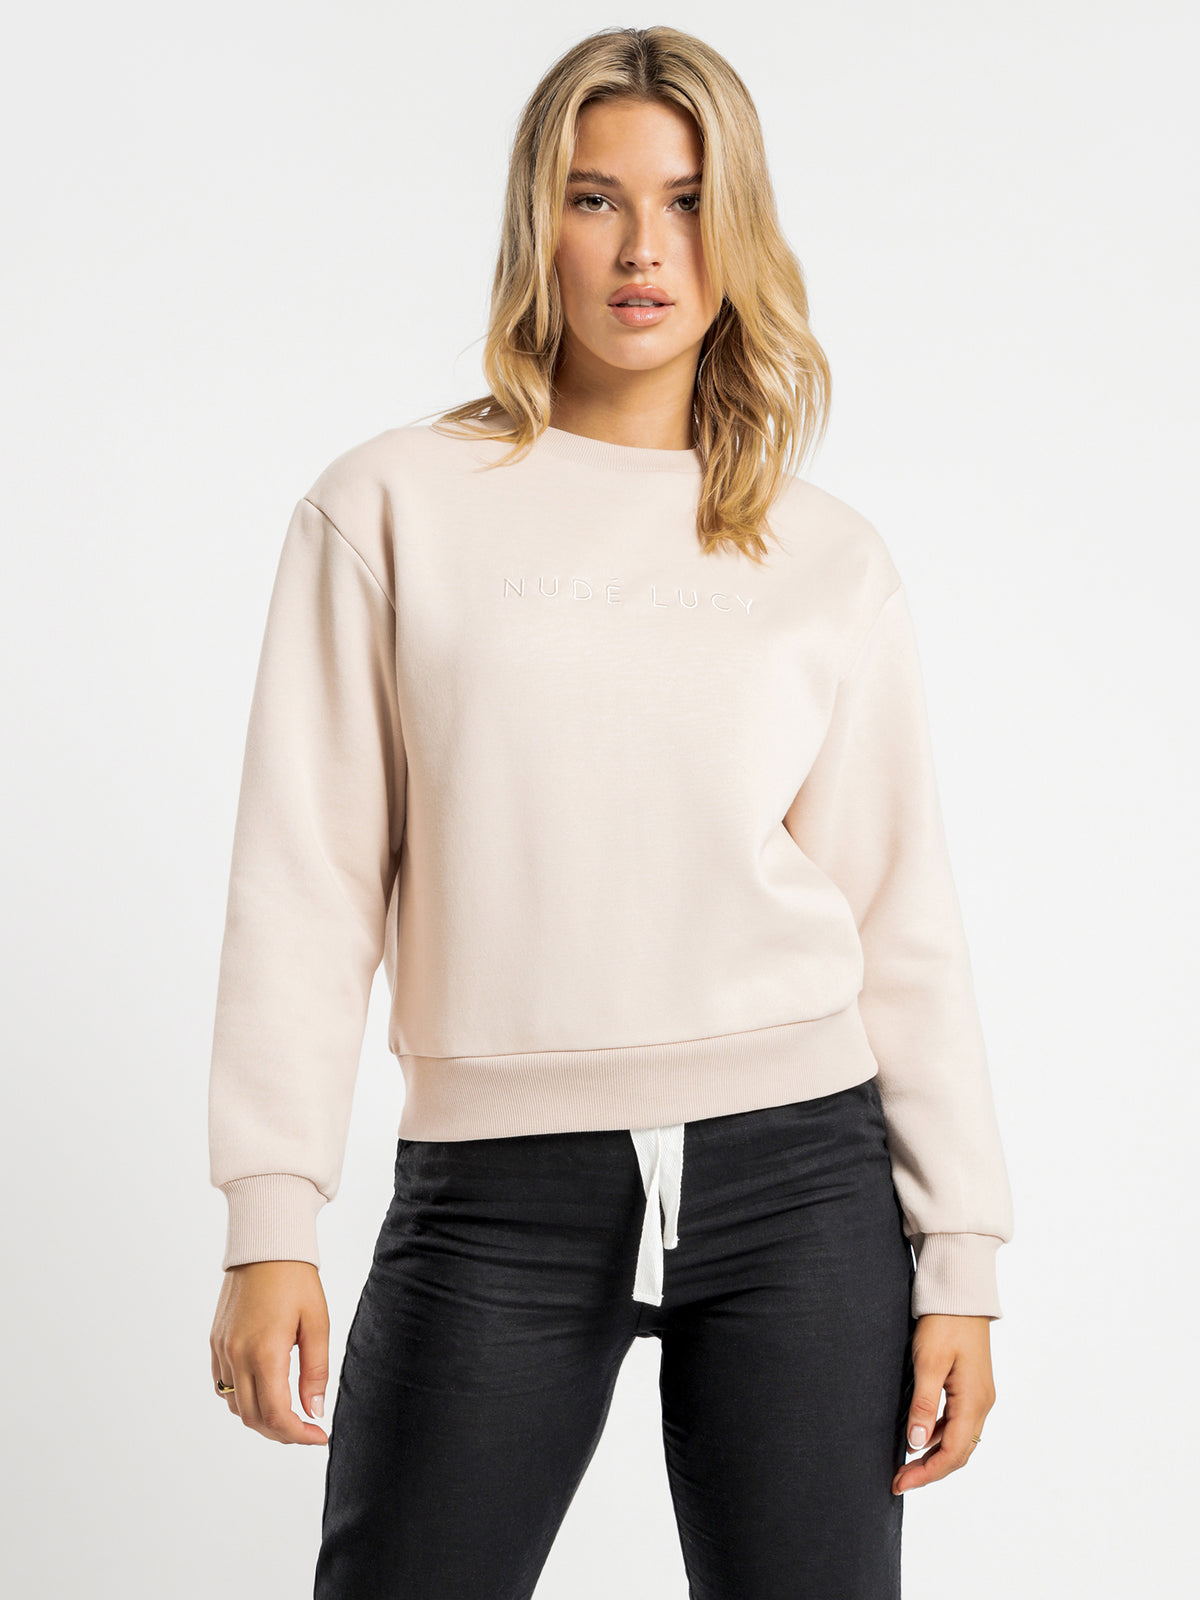 Nude Lucy Embroidery Sweater in Blush